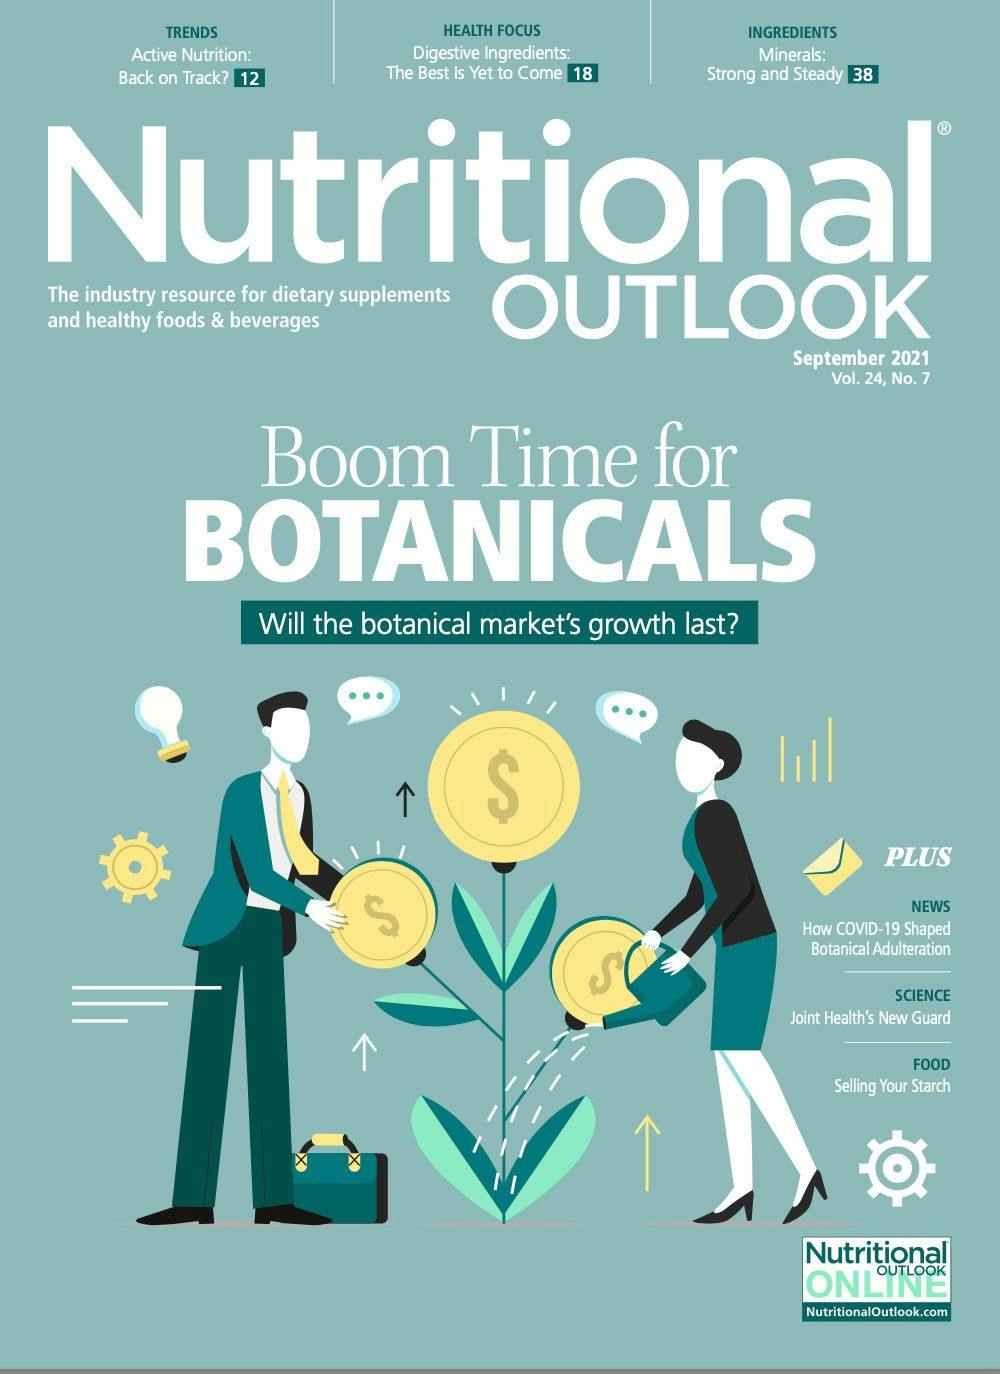 Nutritional Outlook Vol. 24 No. 7